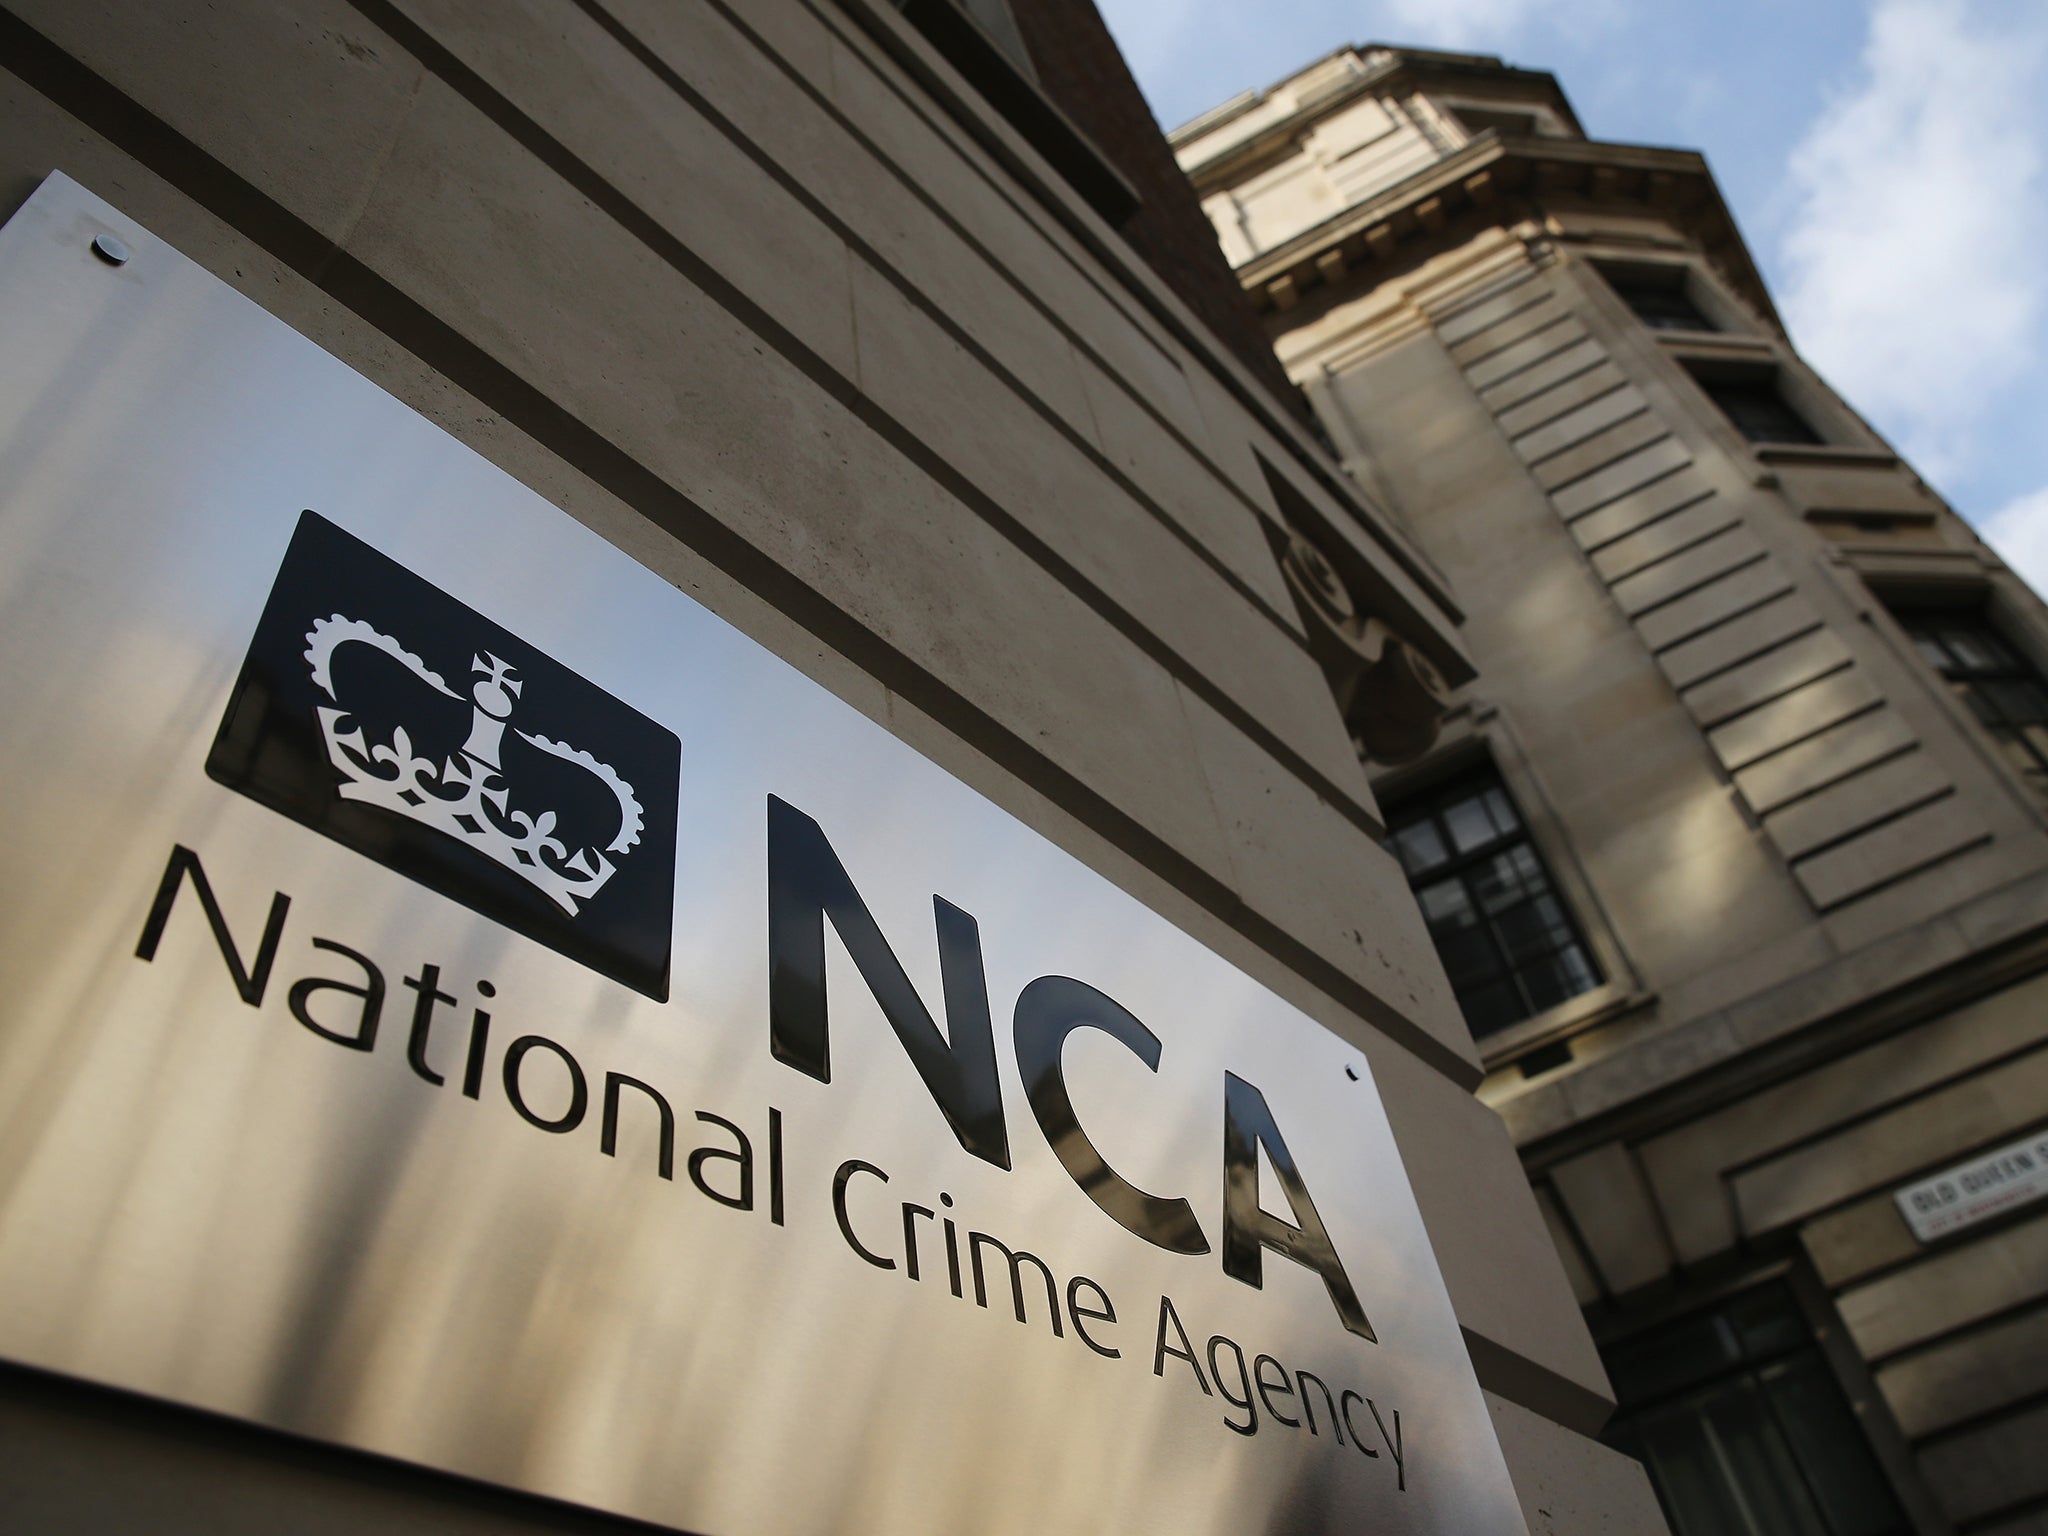 Daldoprh was arrested by officers from the National Crime Agency (NCA) in April